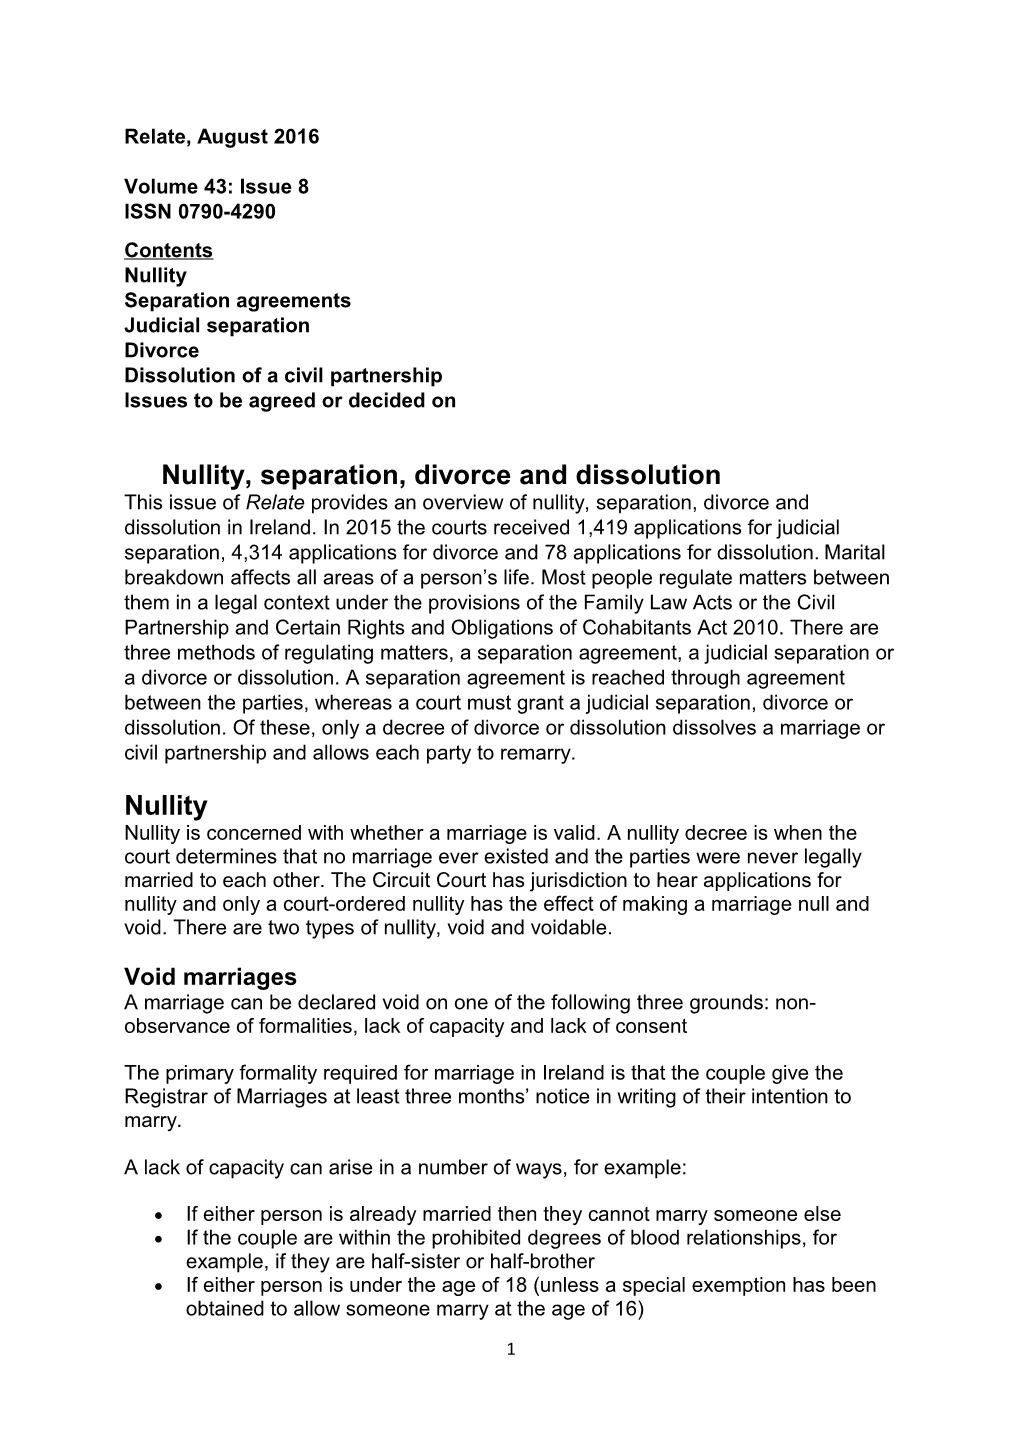 Nullity, Separation, Divorce and Dissolution